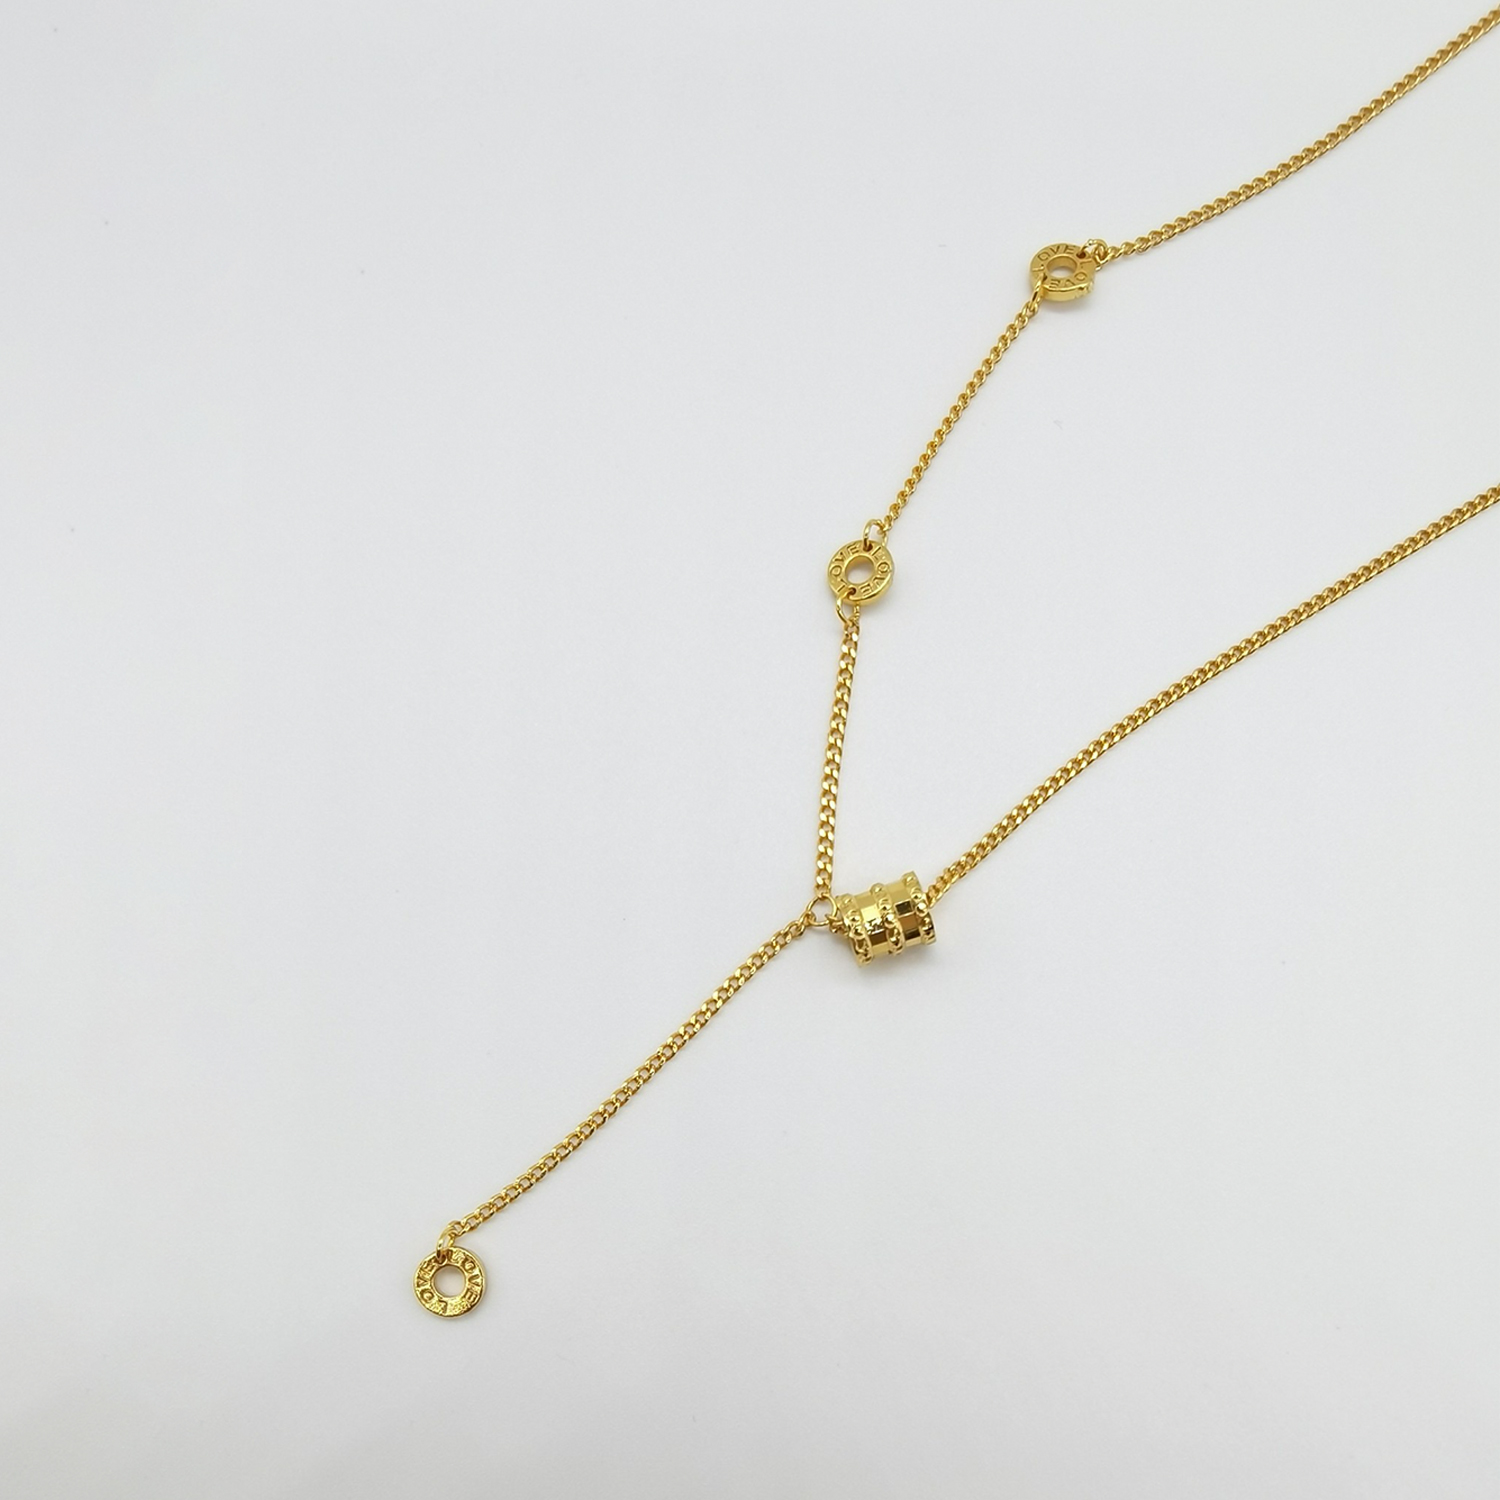 Alluvial gold vacuum electroplating 24K gold small waist necklace